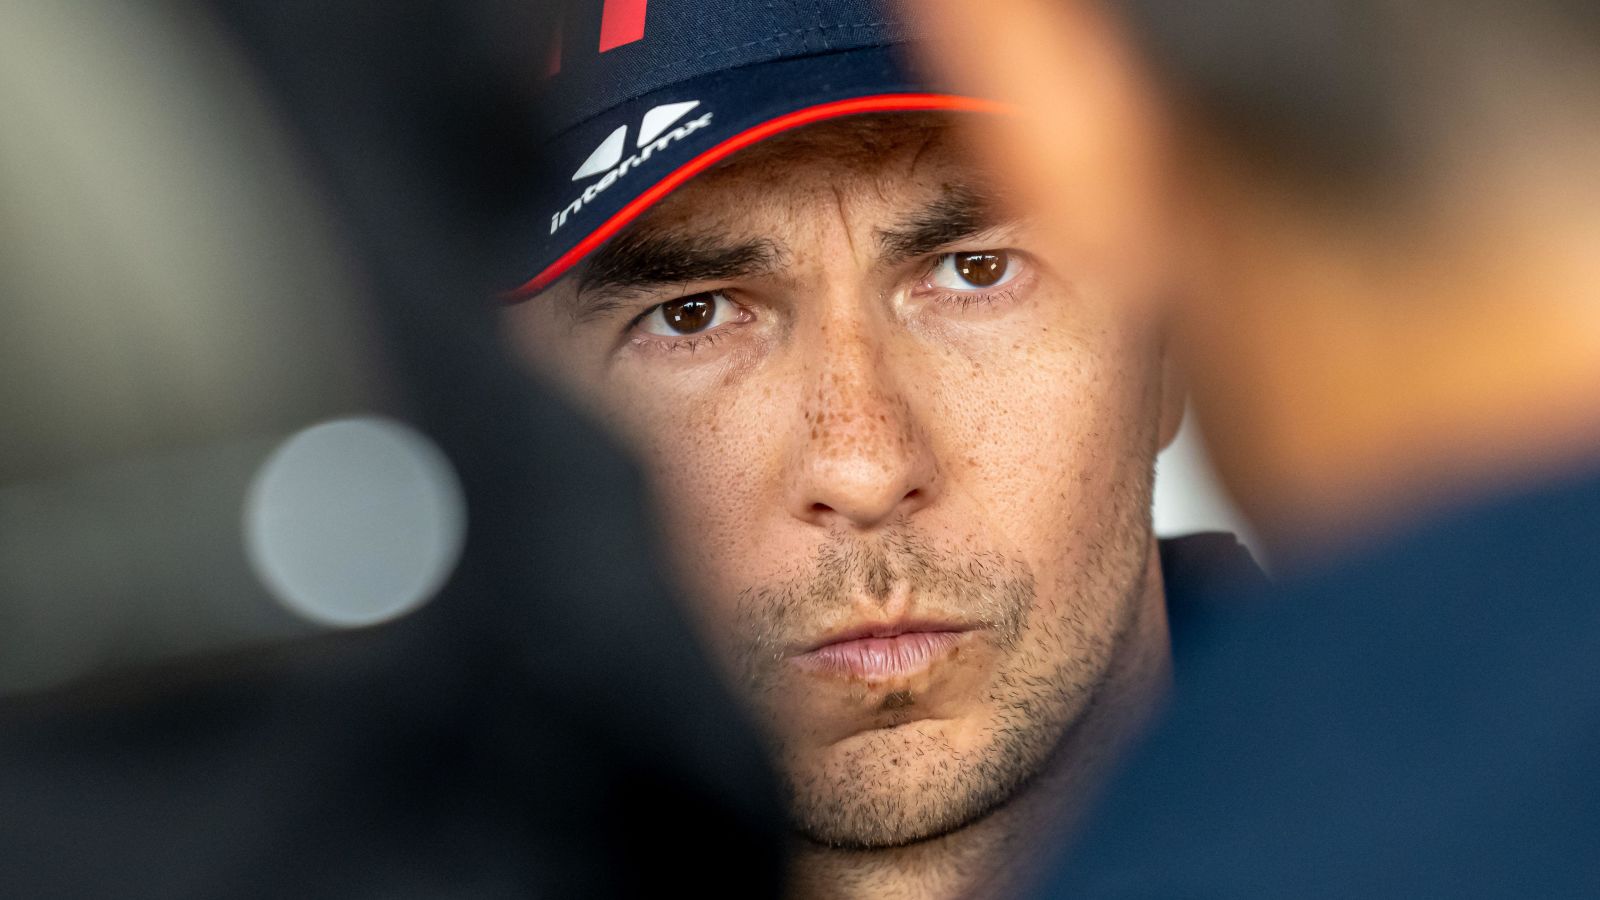 Red Bull driver Sergio Perez faces questions from the media at the Dutch Grand Prix at Zandvoort.